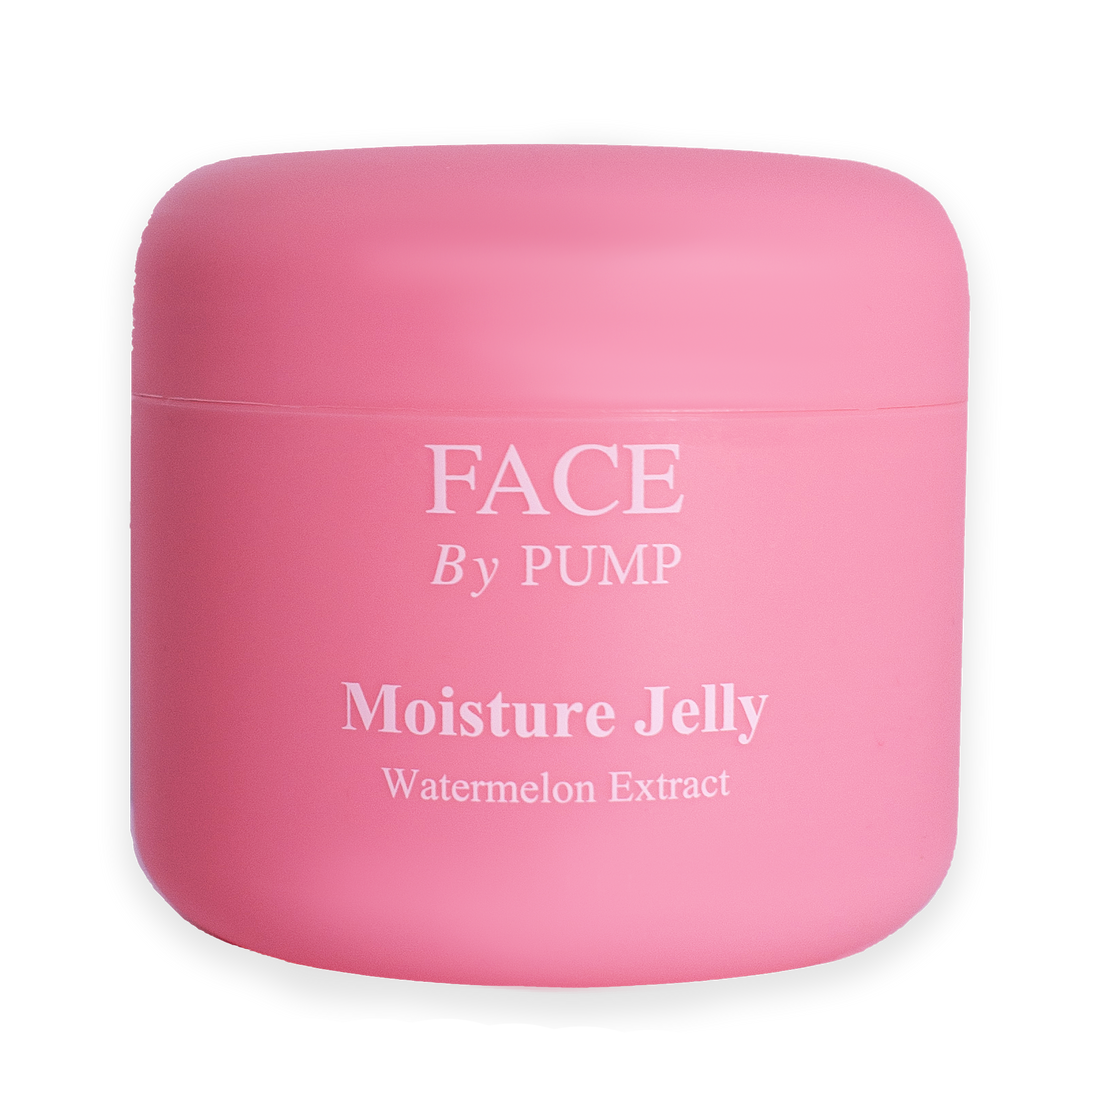 FACE By PUMP Moisture Jelly